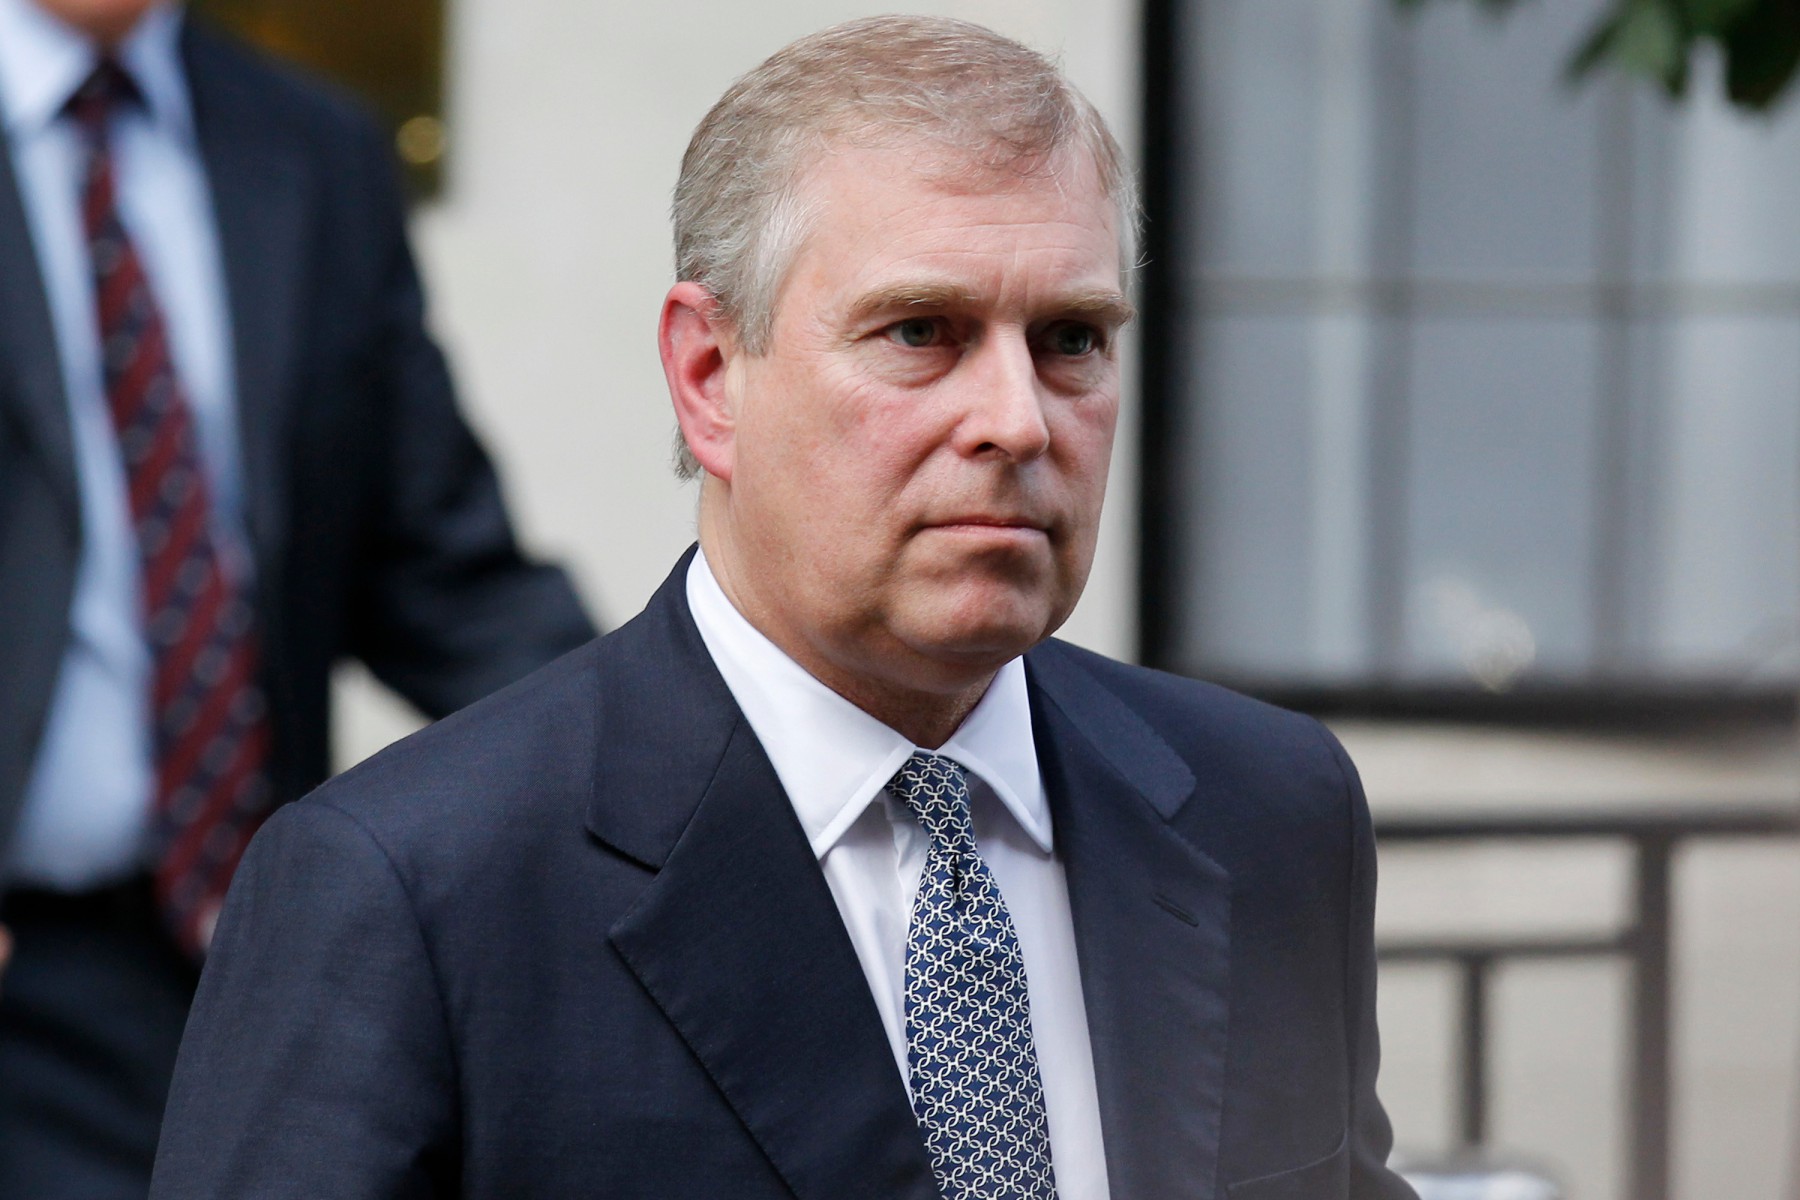 Maxwell has said she wants to defend Prince Andrew